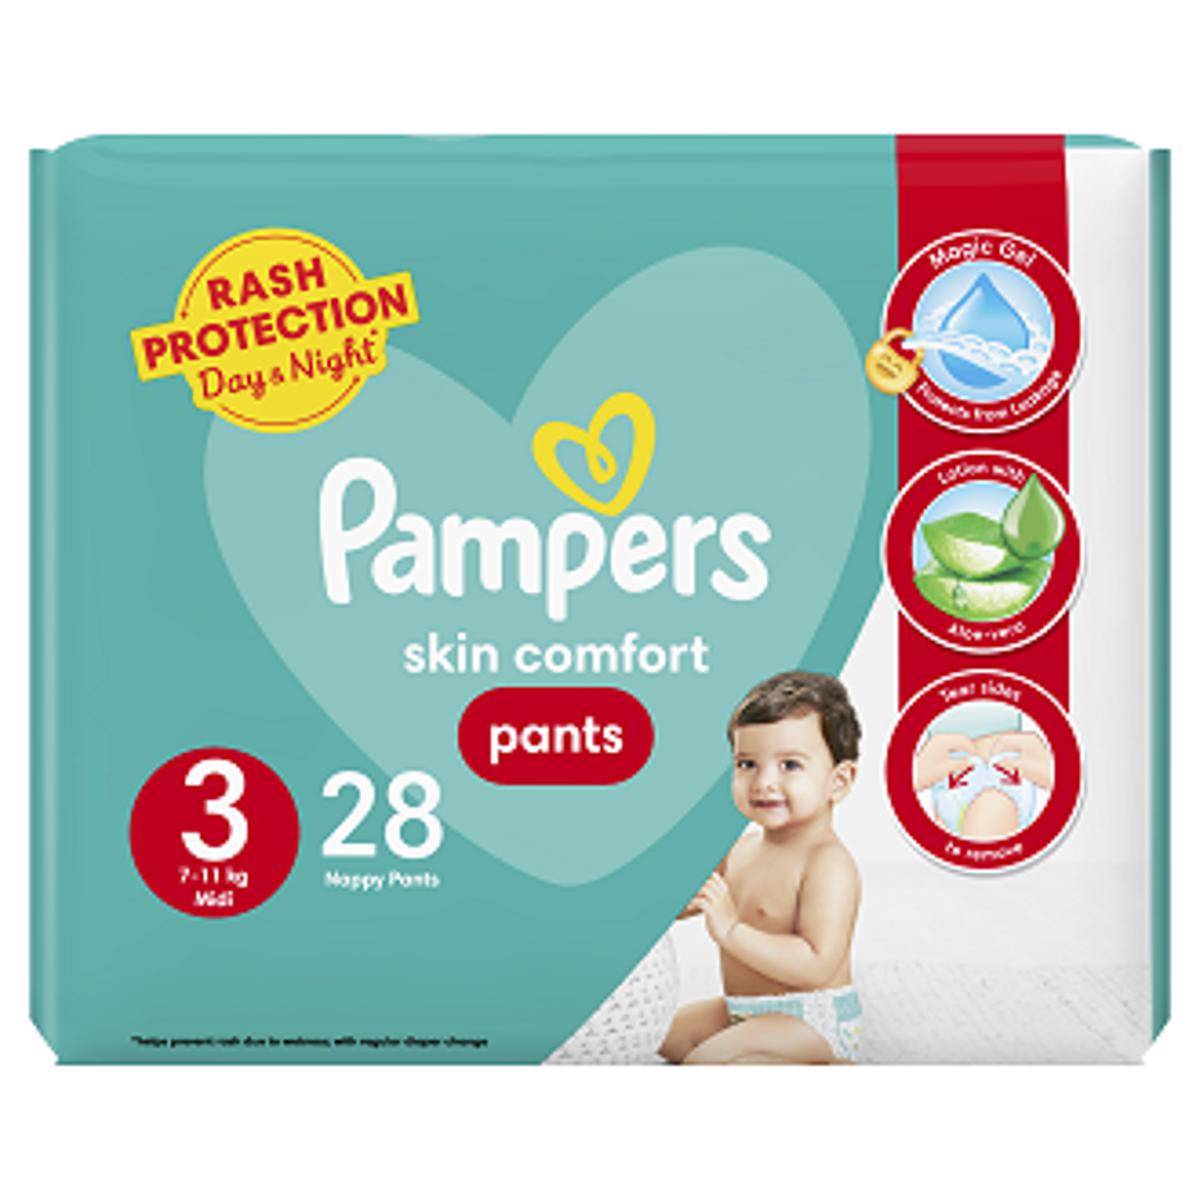 Pampers Pants Baby Diapers (Size 3 Medium 28 Pcs)